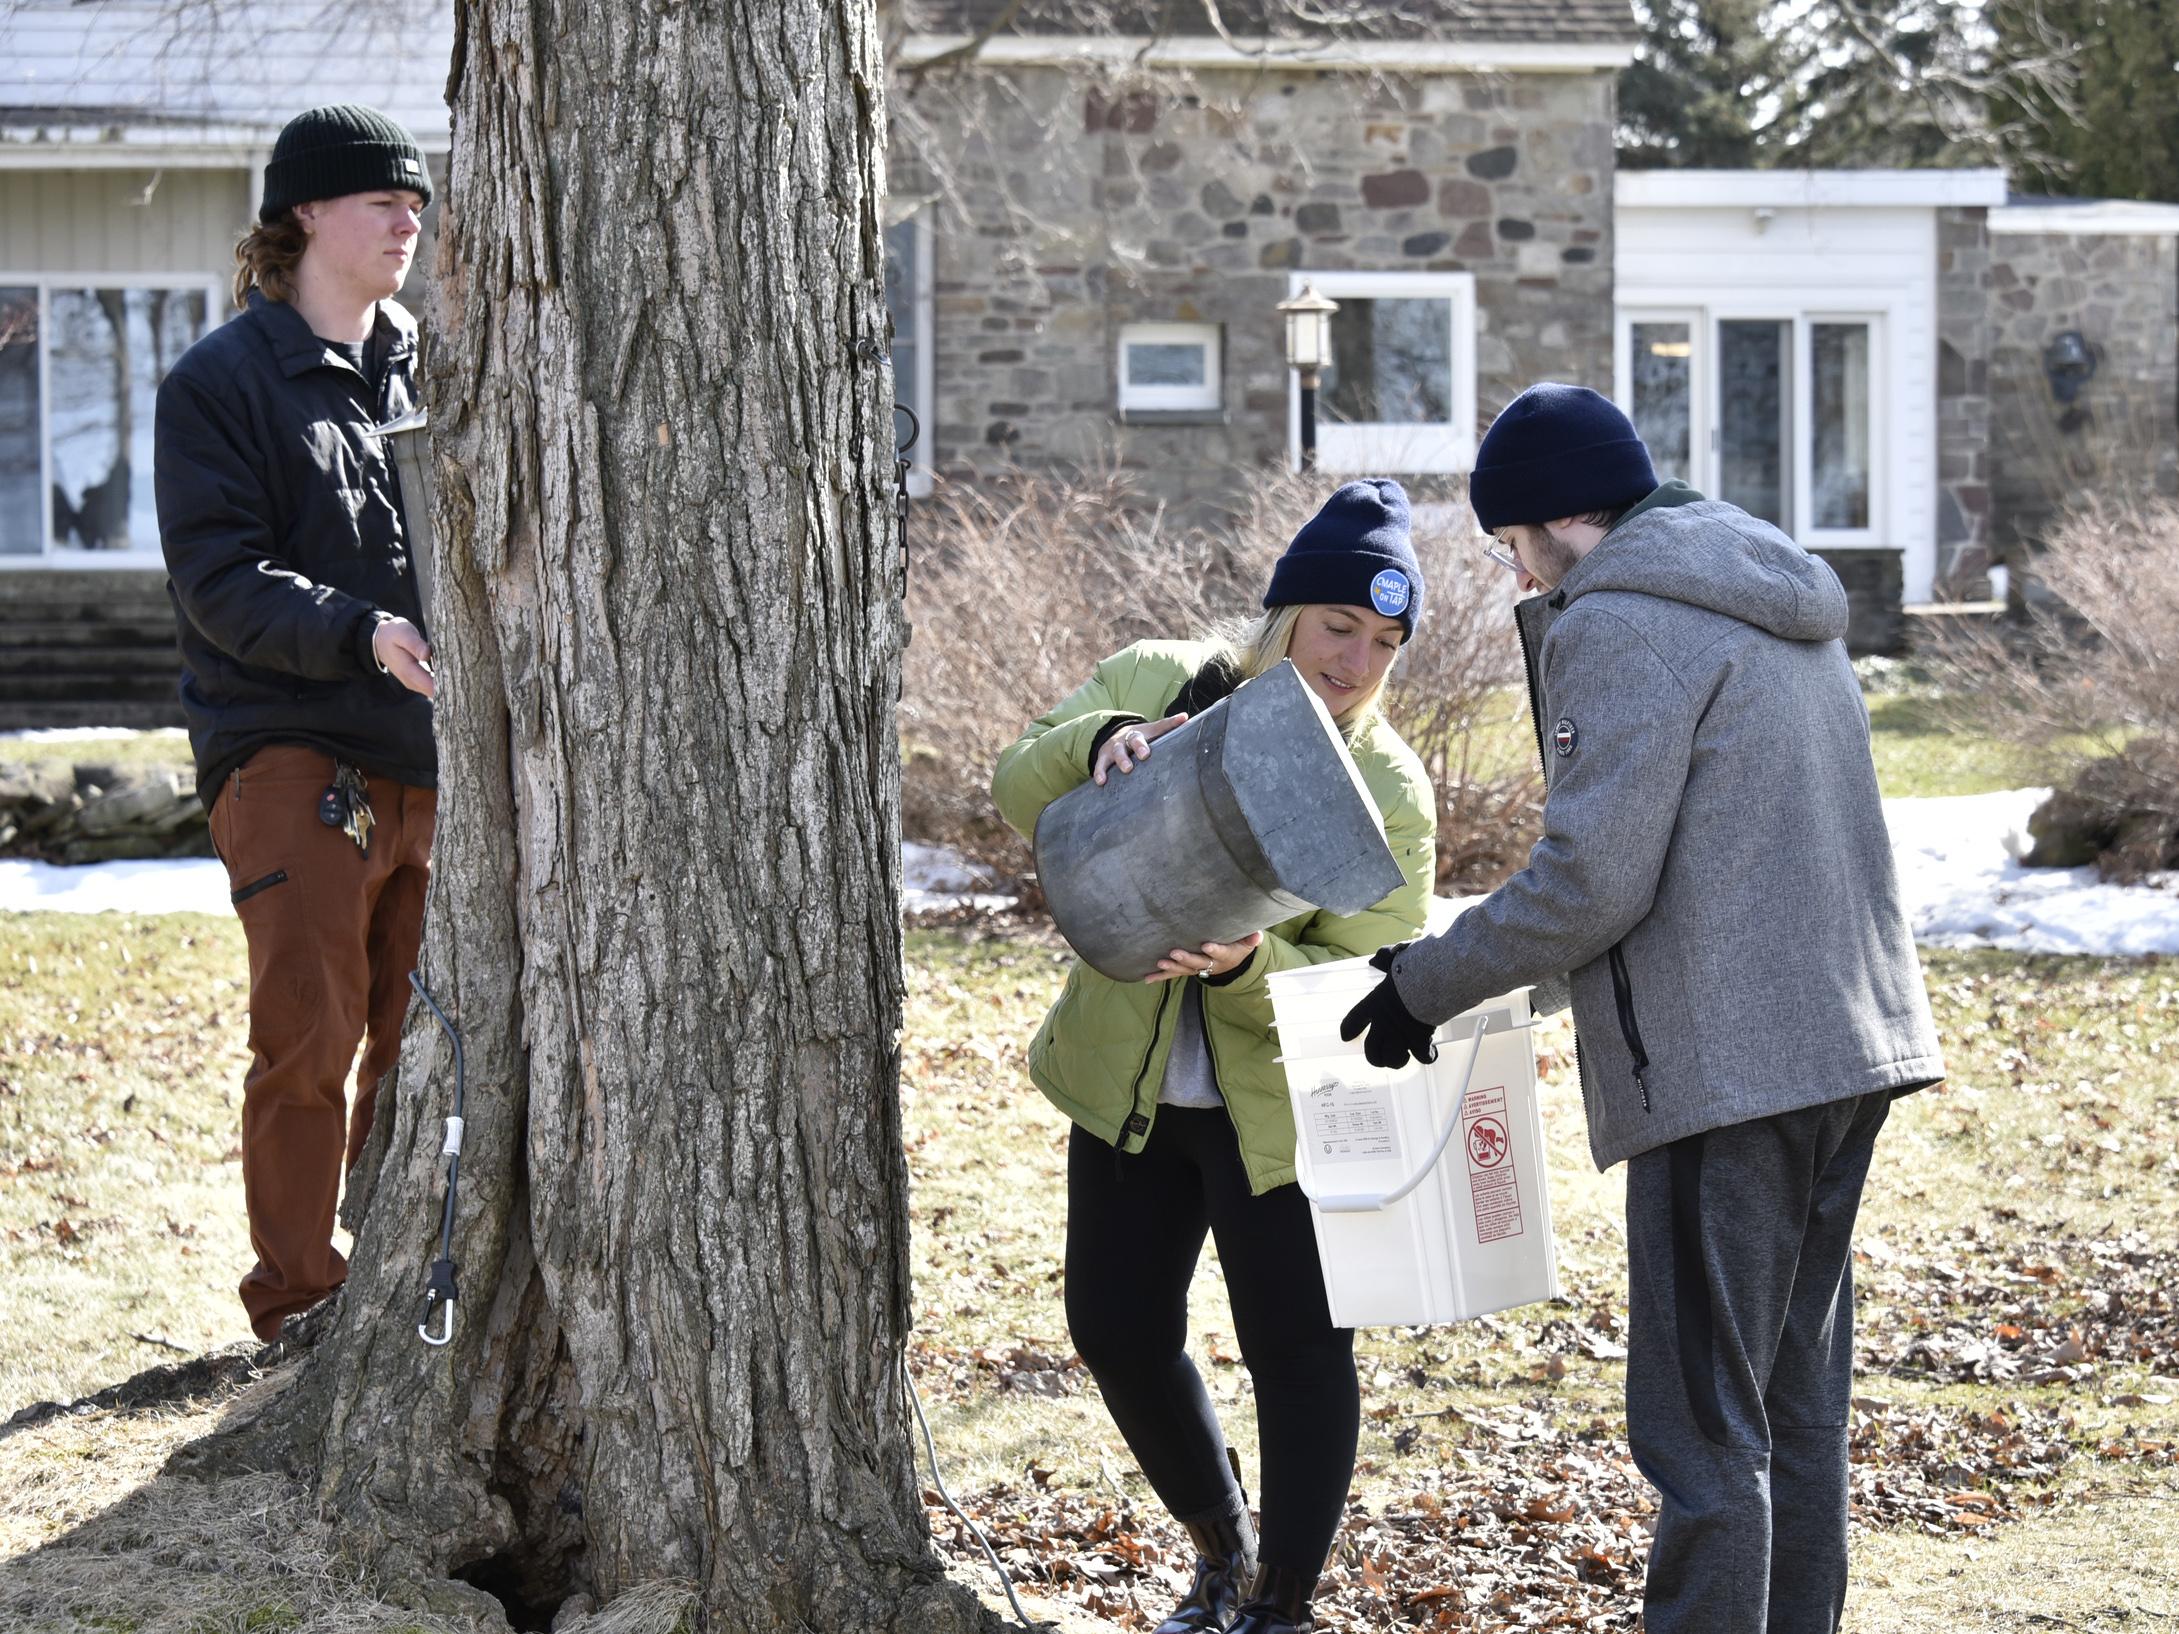 SUNY Oswego students gathered maple sap from trees again in early 2022 in a project that culminated in bringing the resultant maple syrup into dining halls.